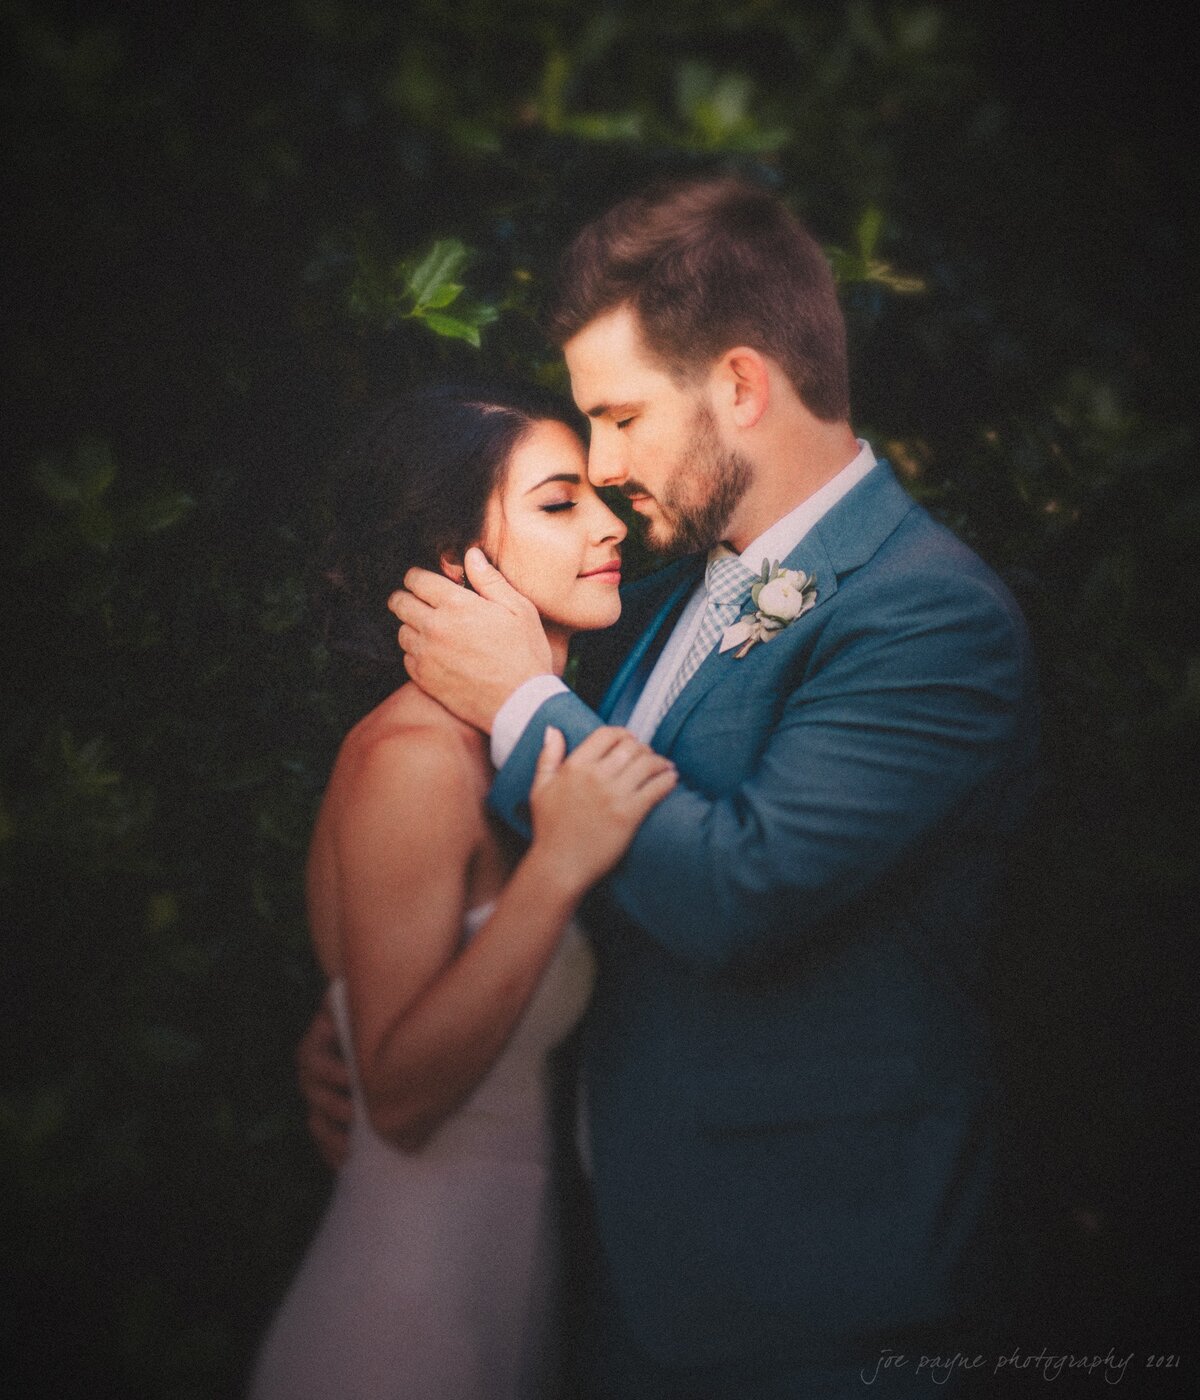 A wedding couple holding each other close with their faces touching.